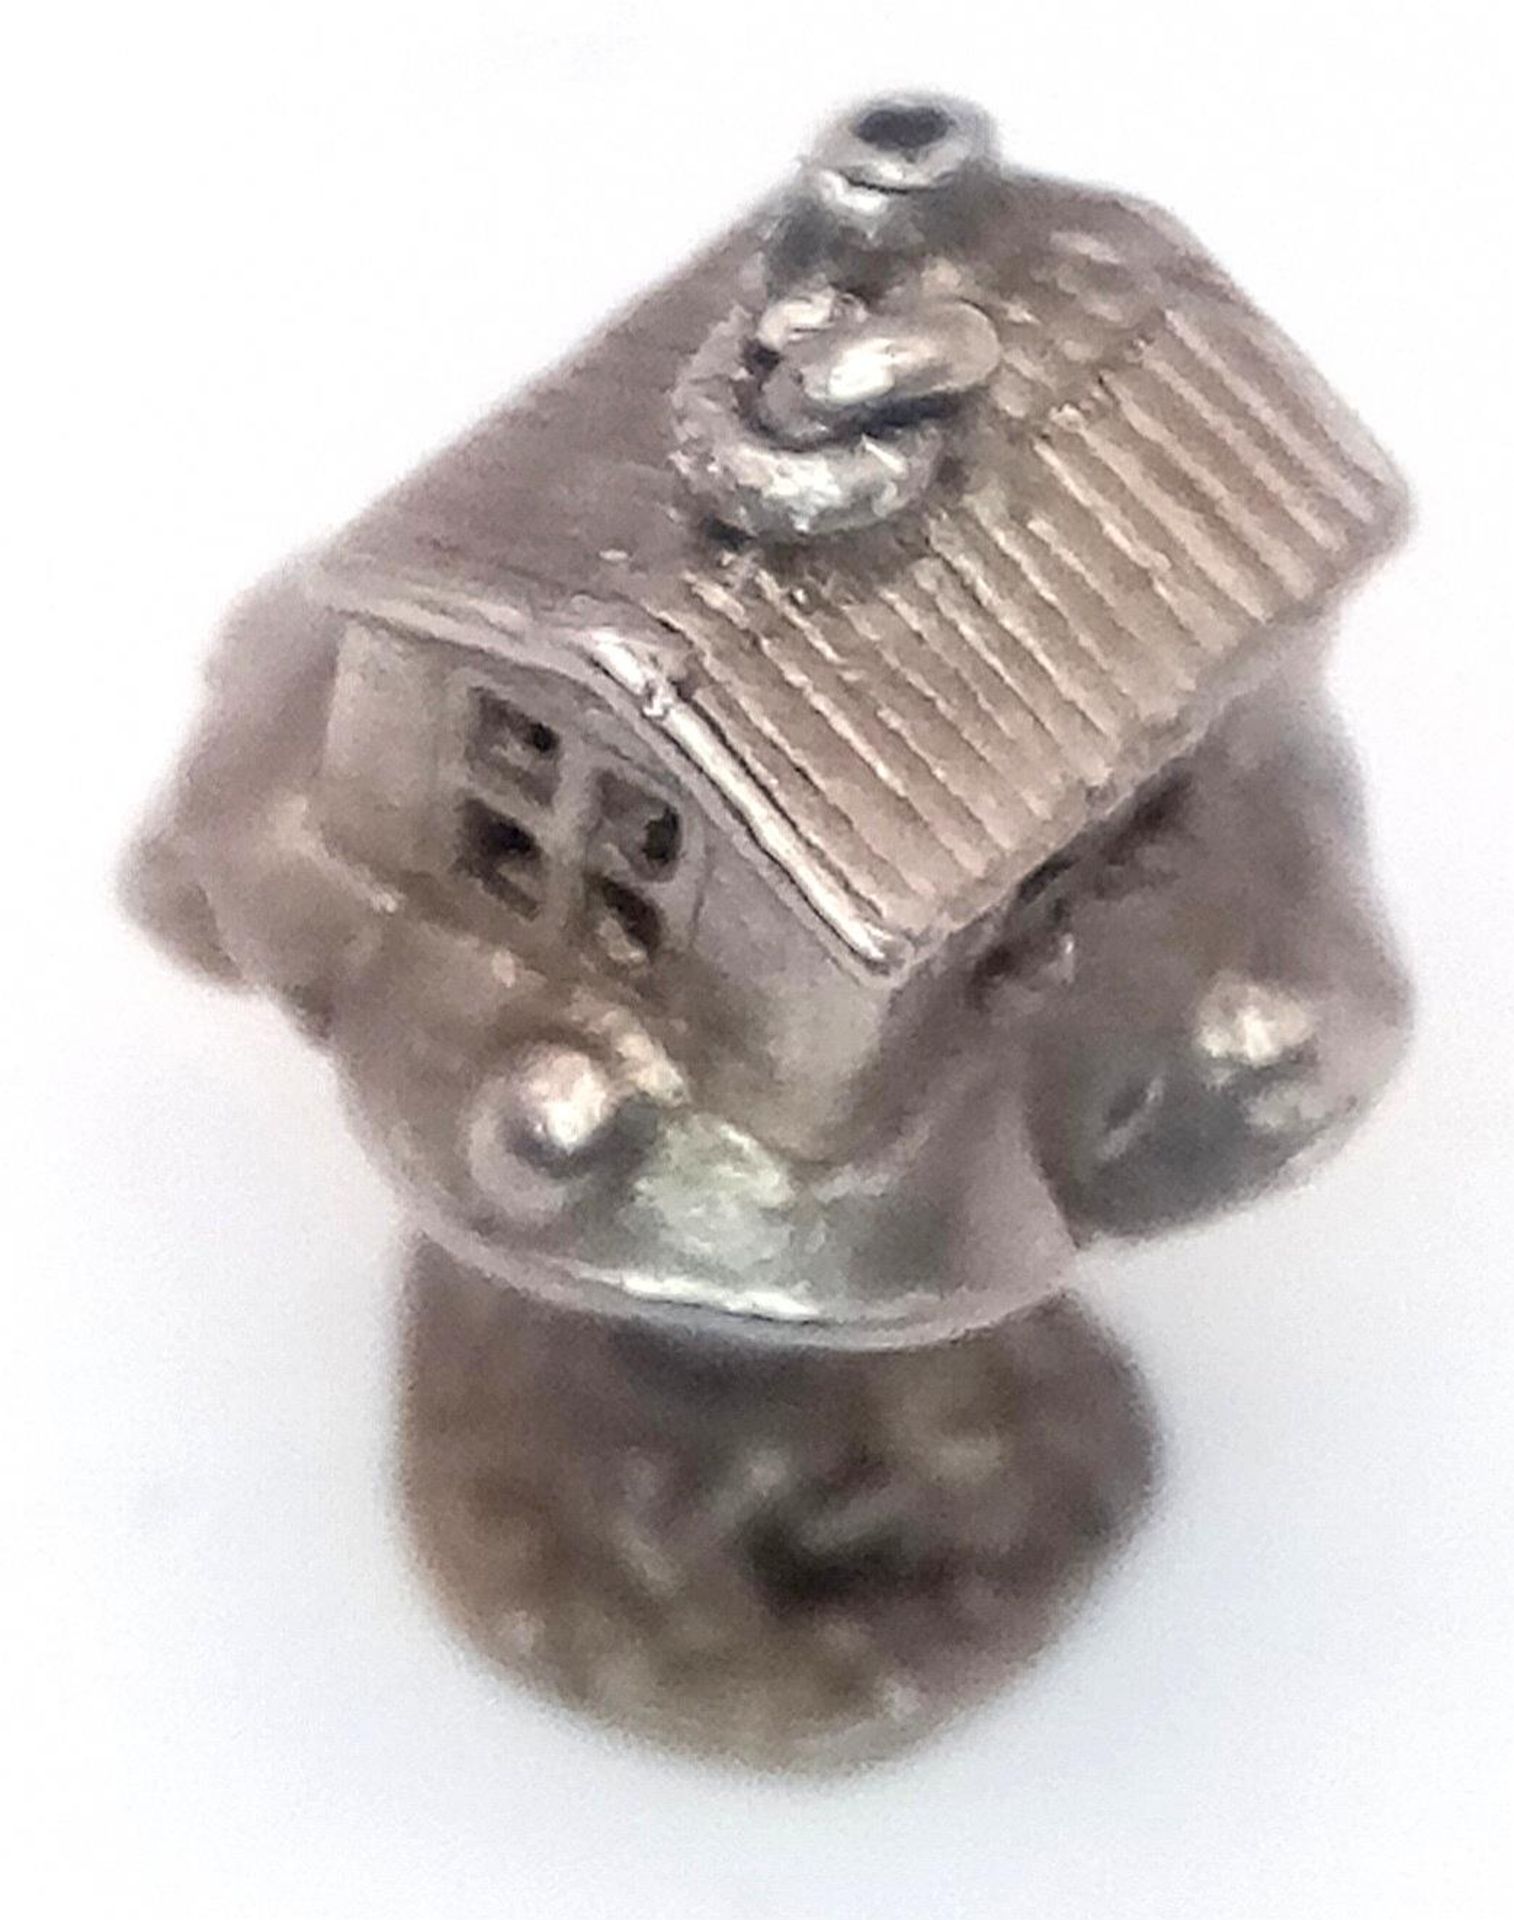 A VINTAGE STERLING SILVER TREE HOUSE CHARM, WHICH OPENS TO REVEAL A WIZARD INSIDE, WEIGHT 4G - Image 4 of 4